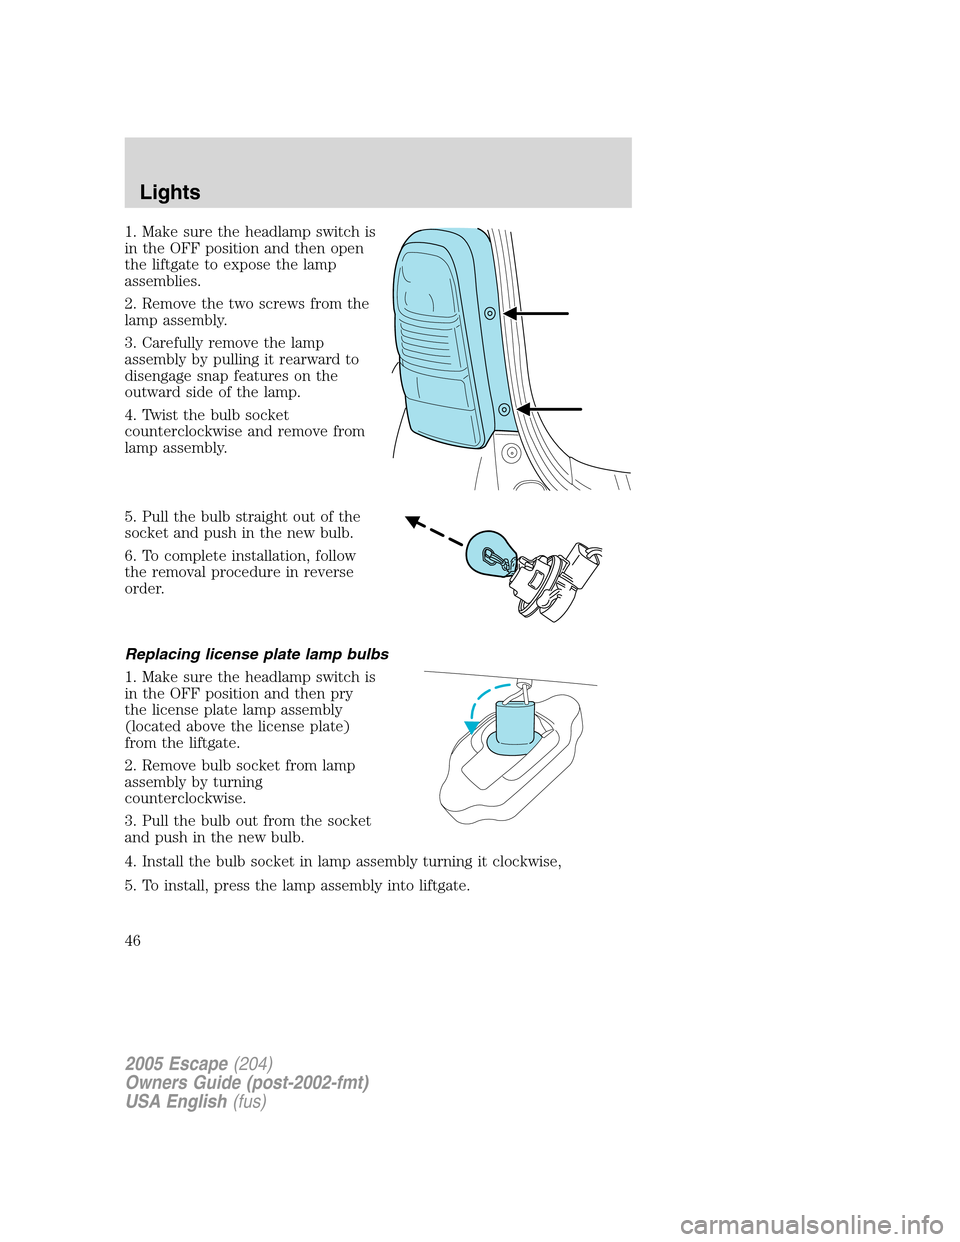 FORD ESCAPE 2005 1.G Service Manual 1. Make sure the headlamp switch is
in the OFF position and then open
the liftgate to expose the lamp
assemblies.
2. Remove the two screws from the
lamp assembly.
3. Carefully remove the lamp
assembly